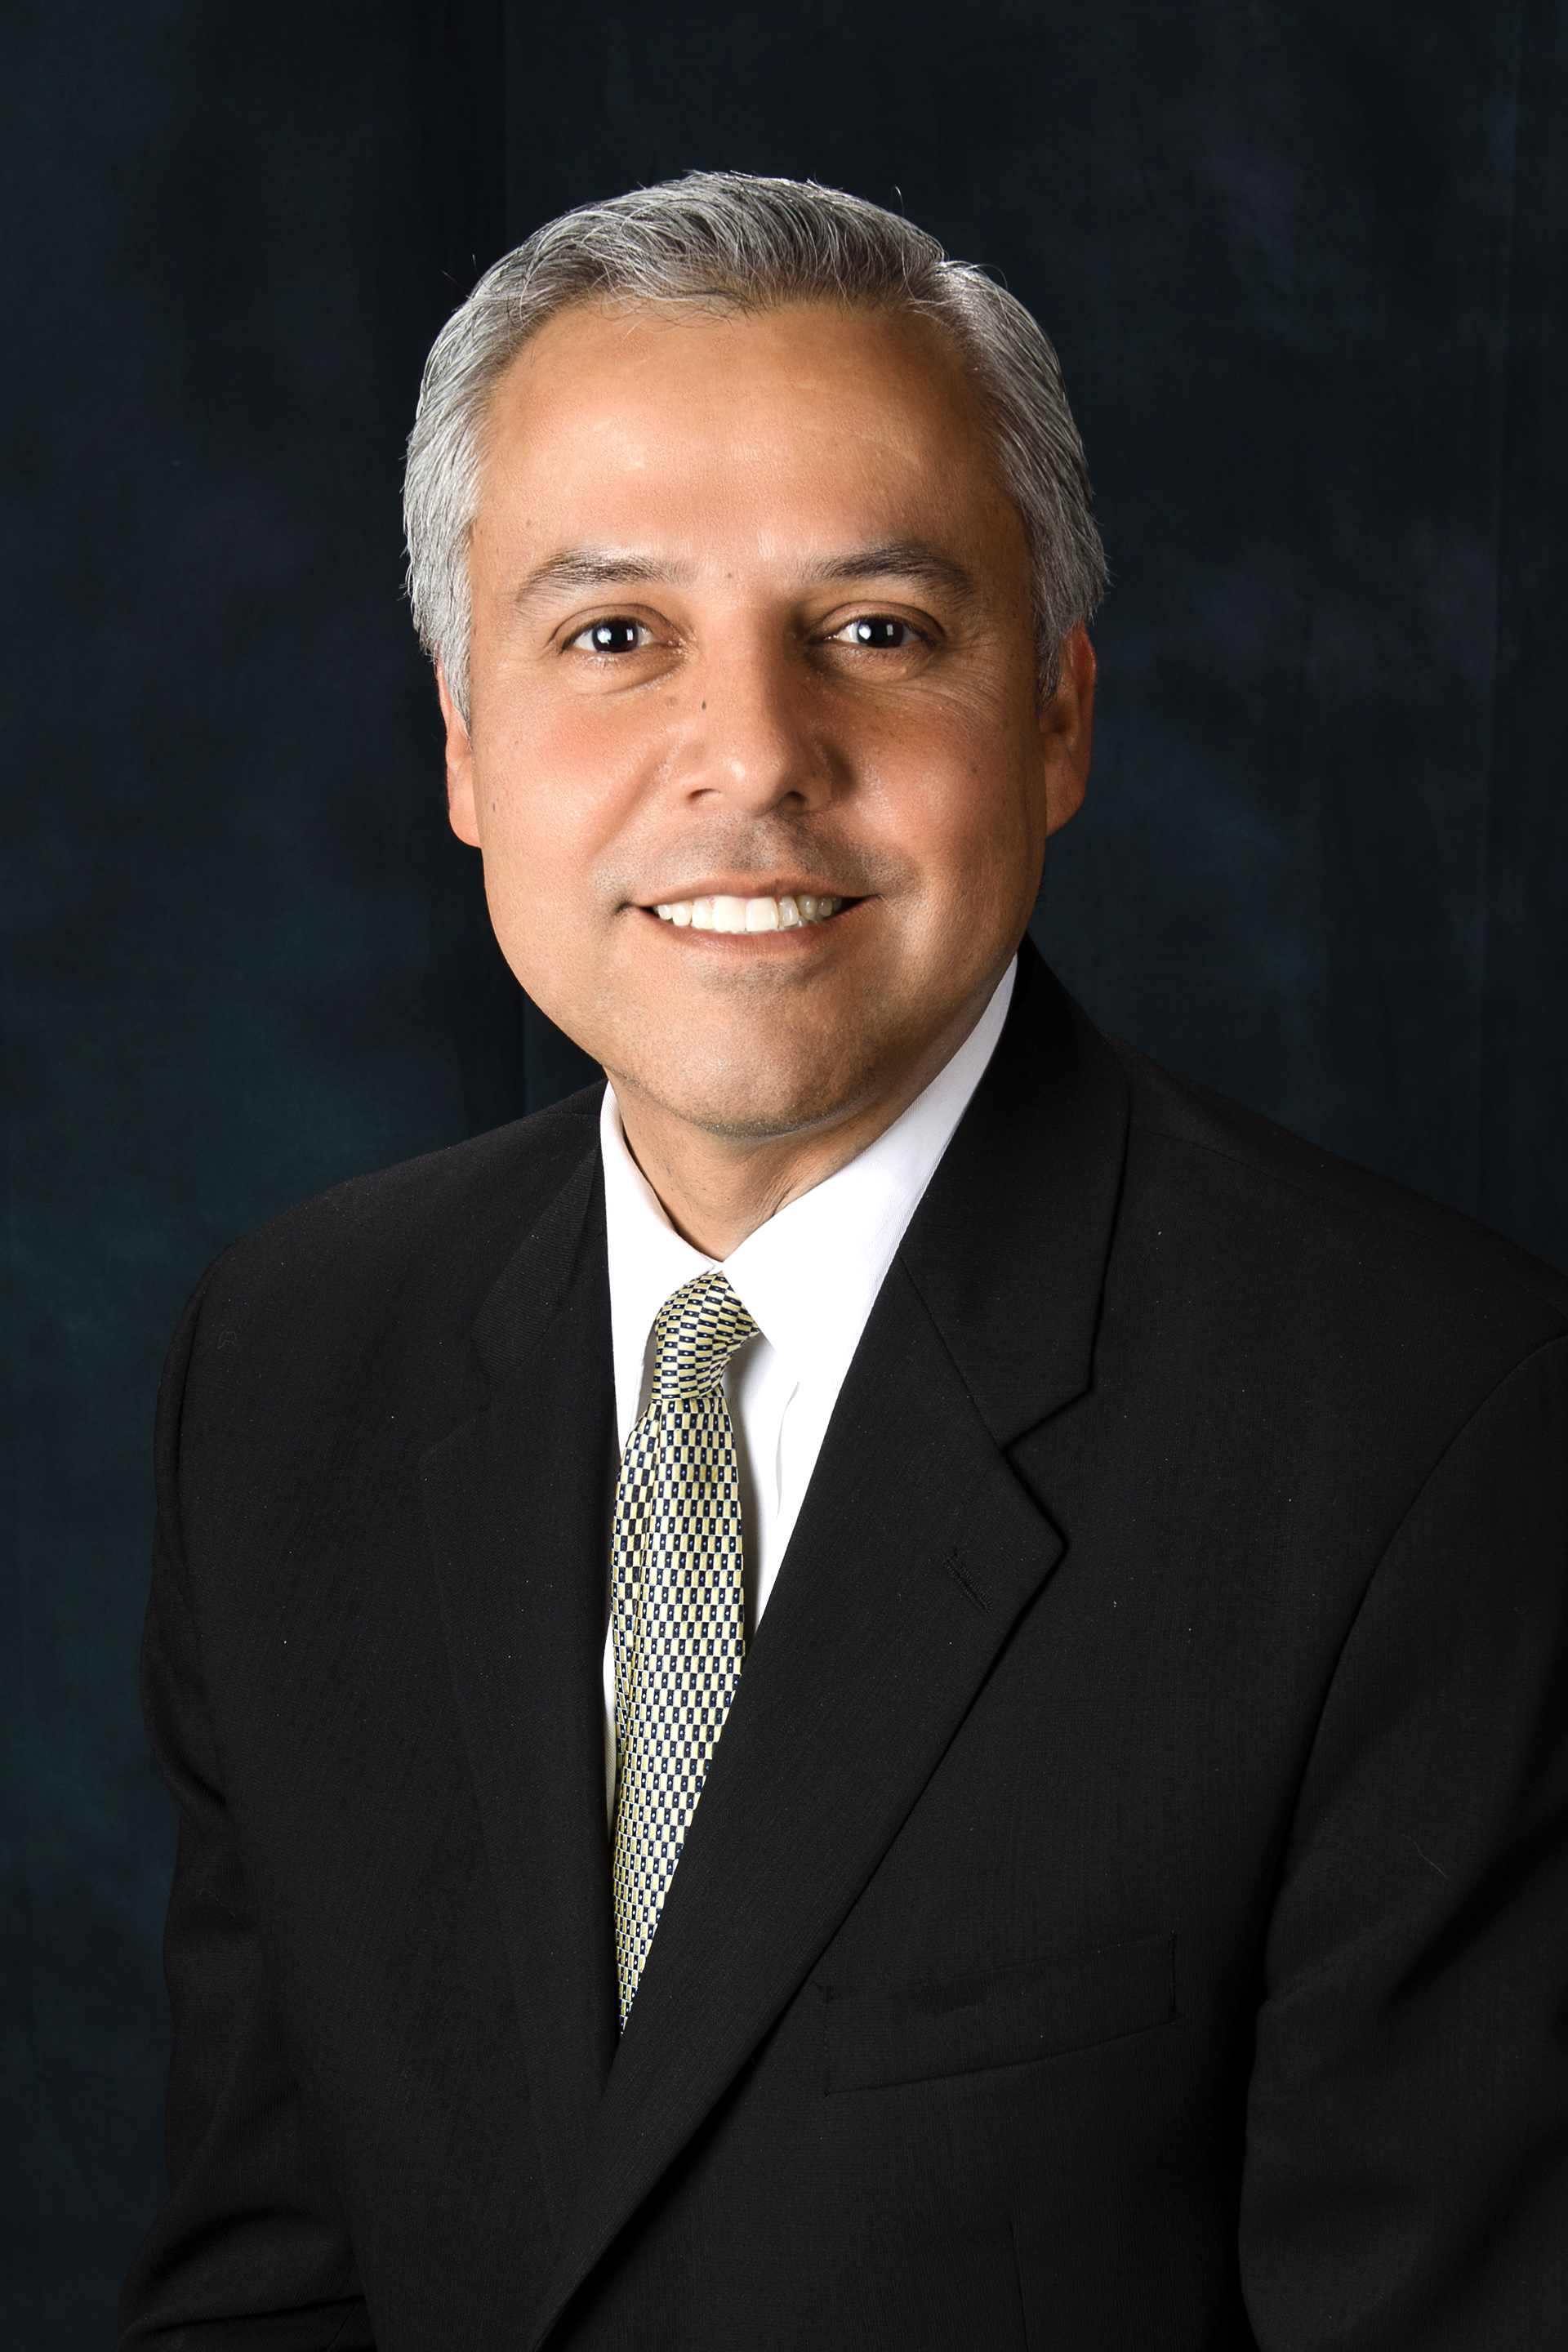 Dr. Art J. Cavazos named Superintendent of Schools by Board of Trustees